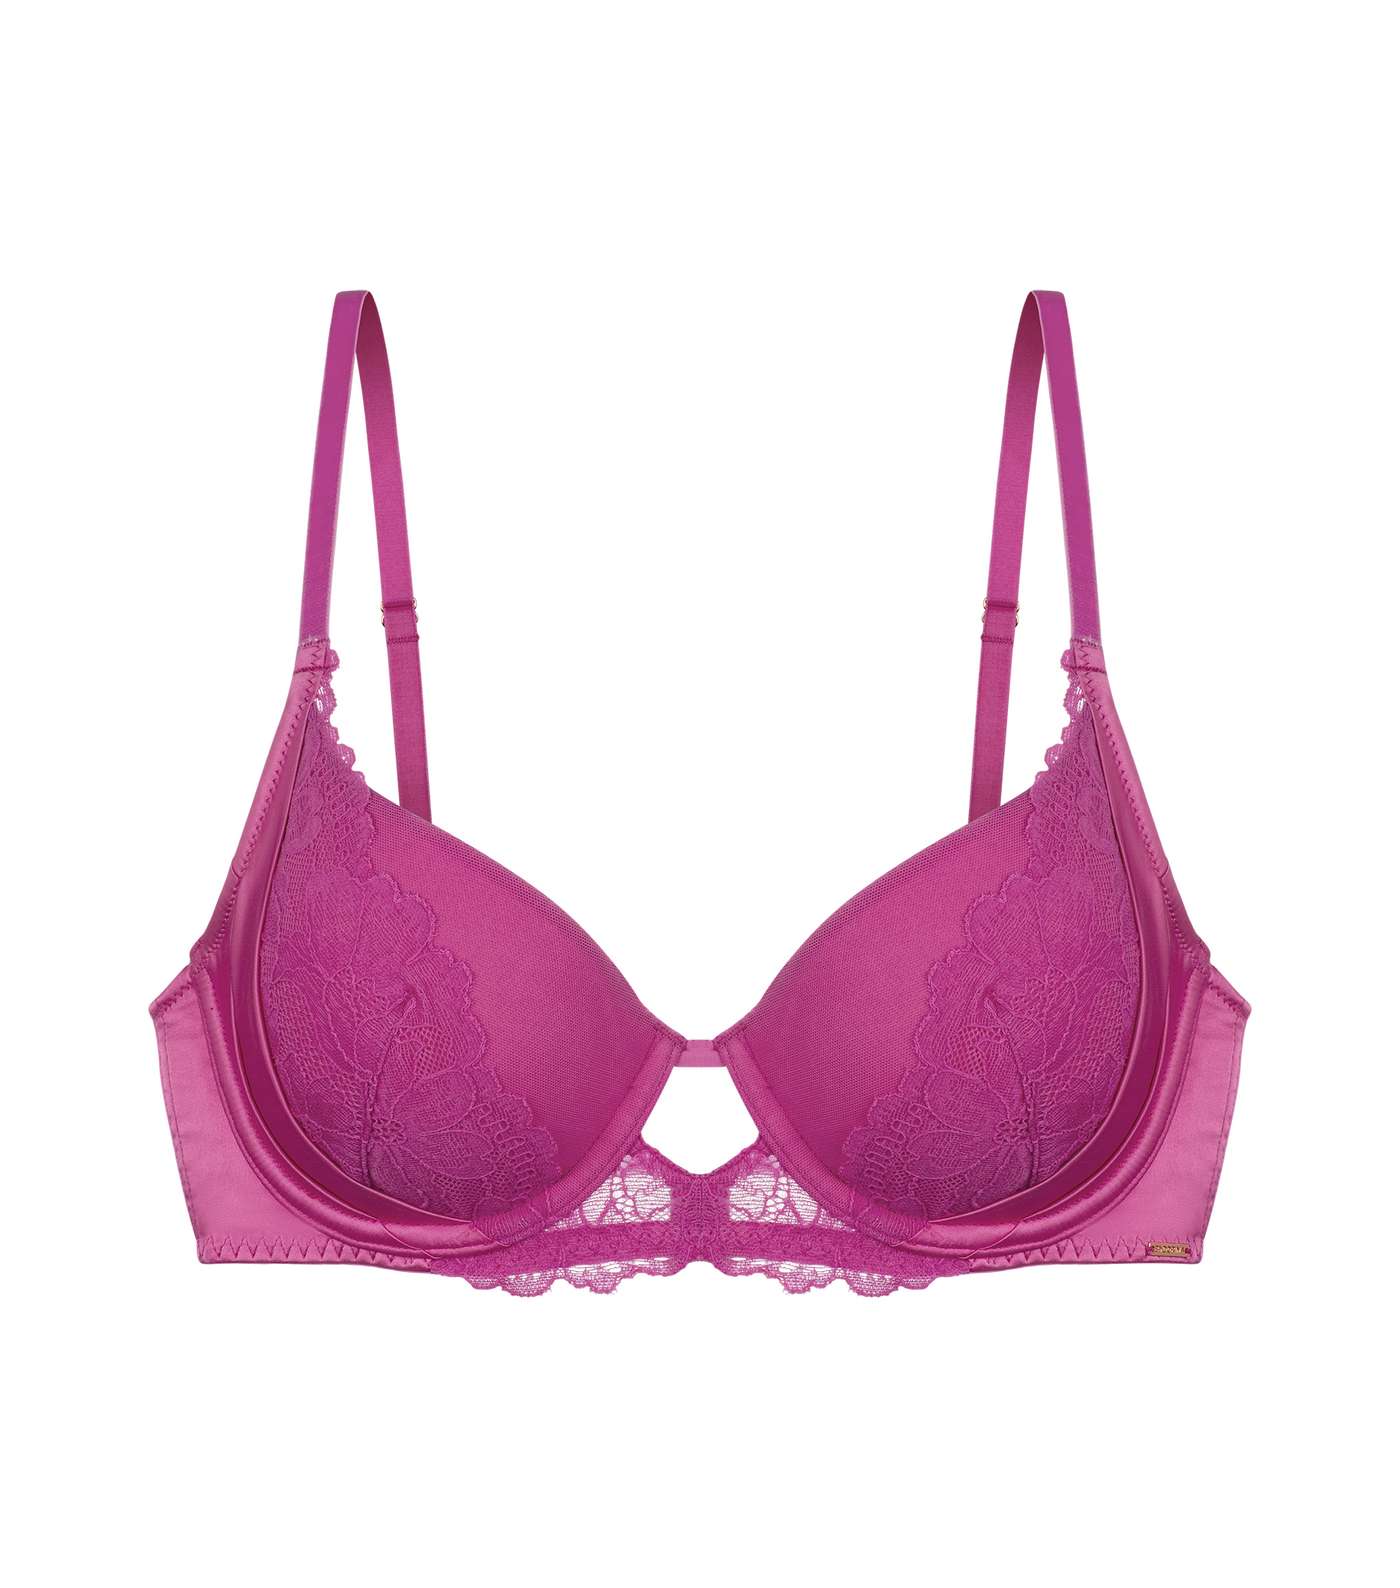 Dorina Mid Pink Satin Floral Lace Underwired Bra Image 5